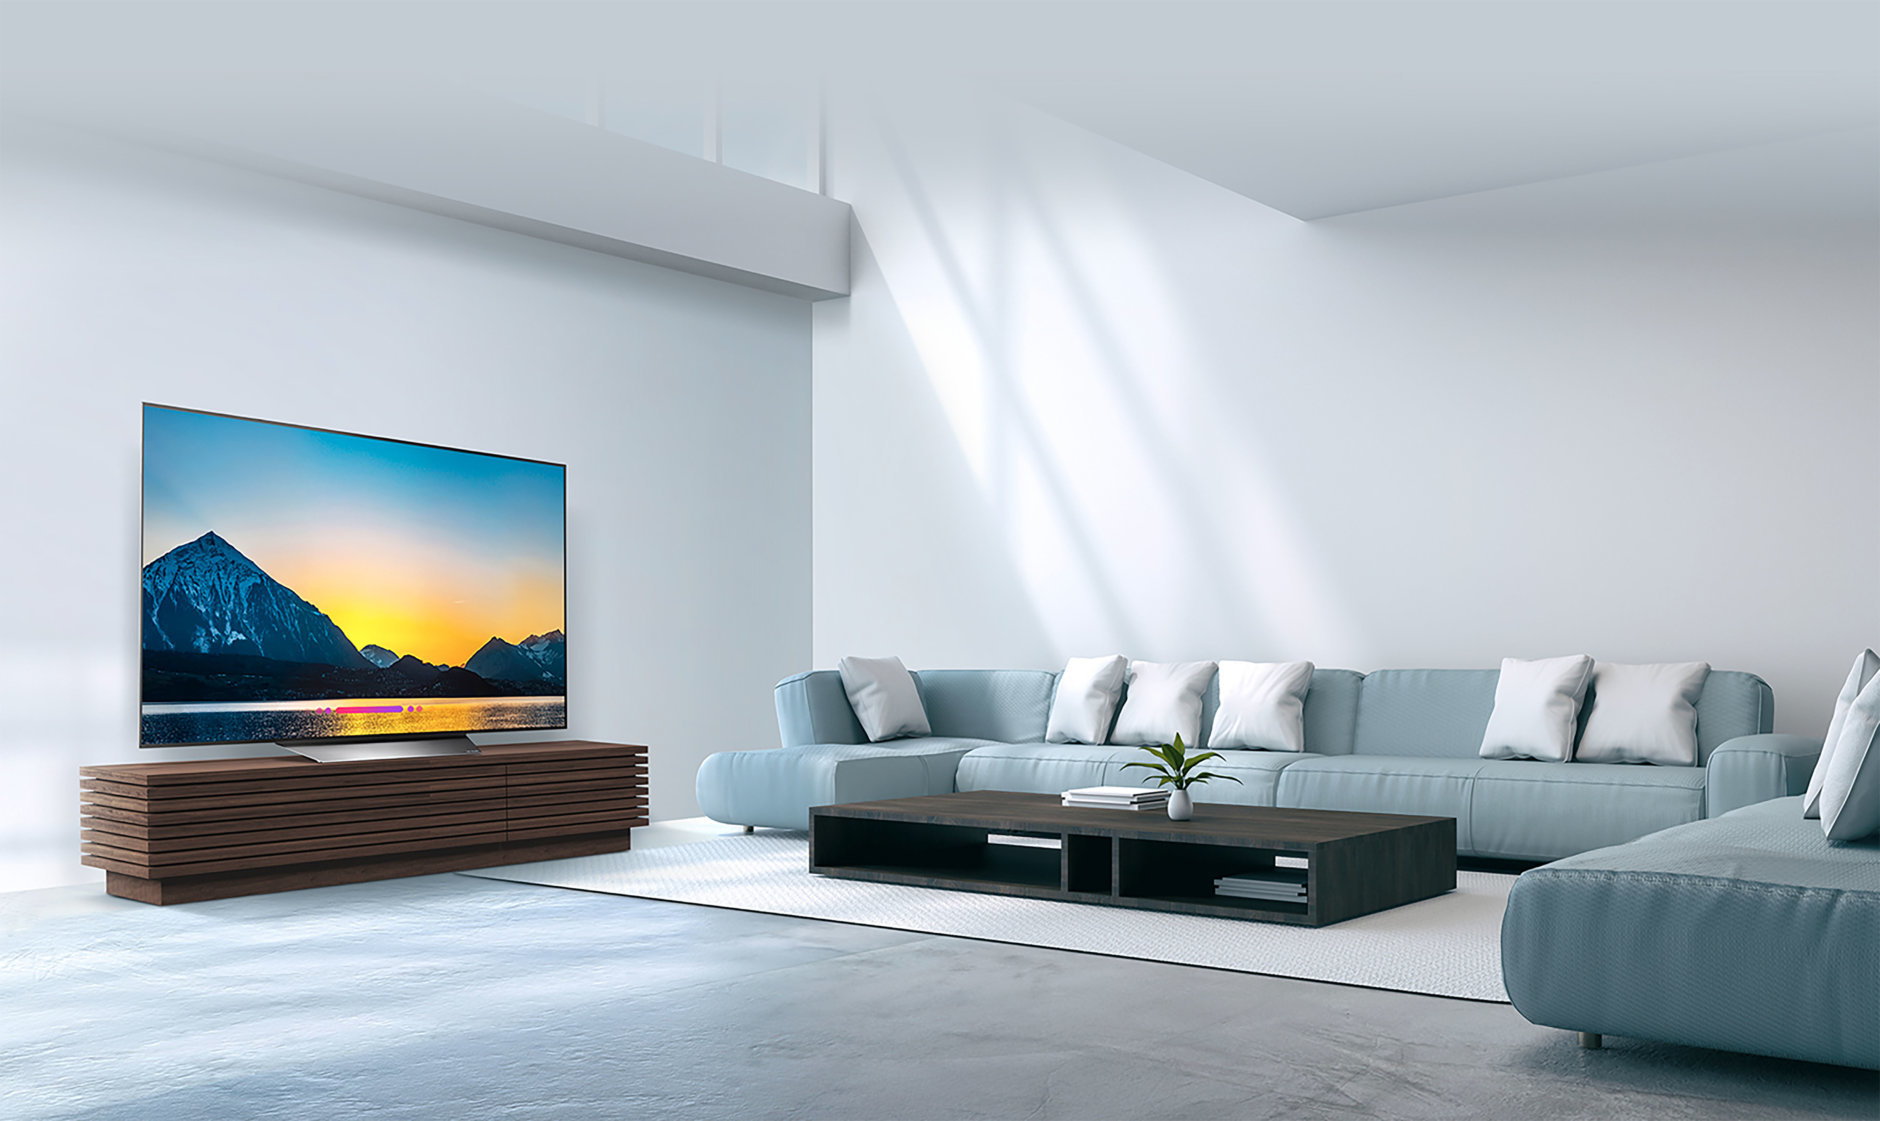 $$$ - The LG OLED B8 series 65-inch costs about $2,800.

"It's just a wonderful TV at the top of our ratings," Wilcox said.

(Courtesy LG)